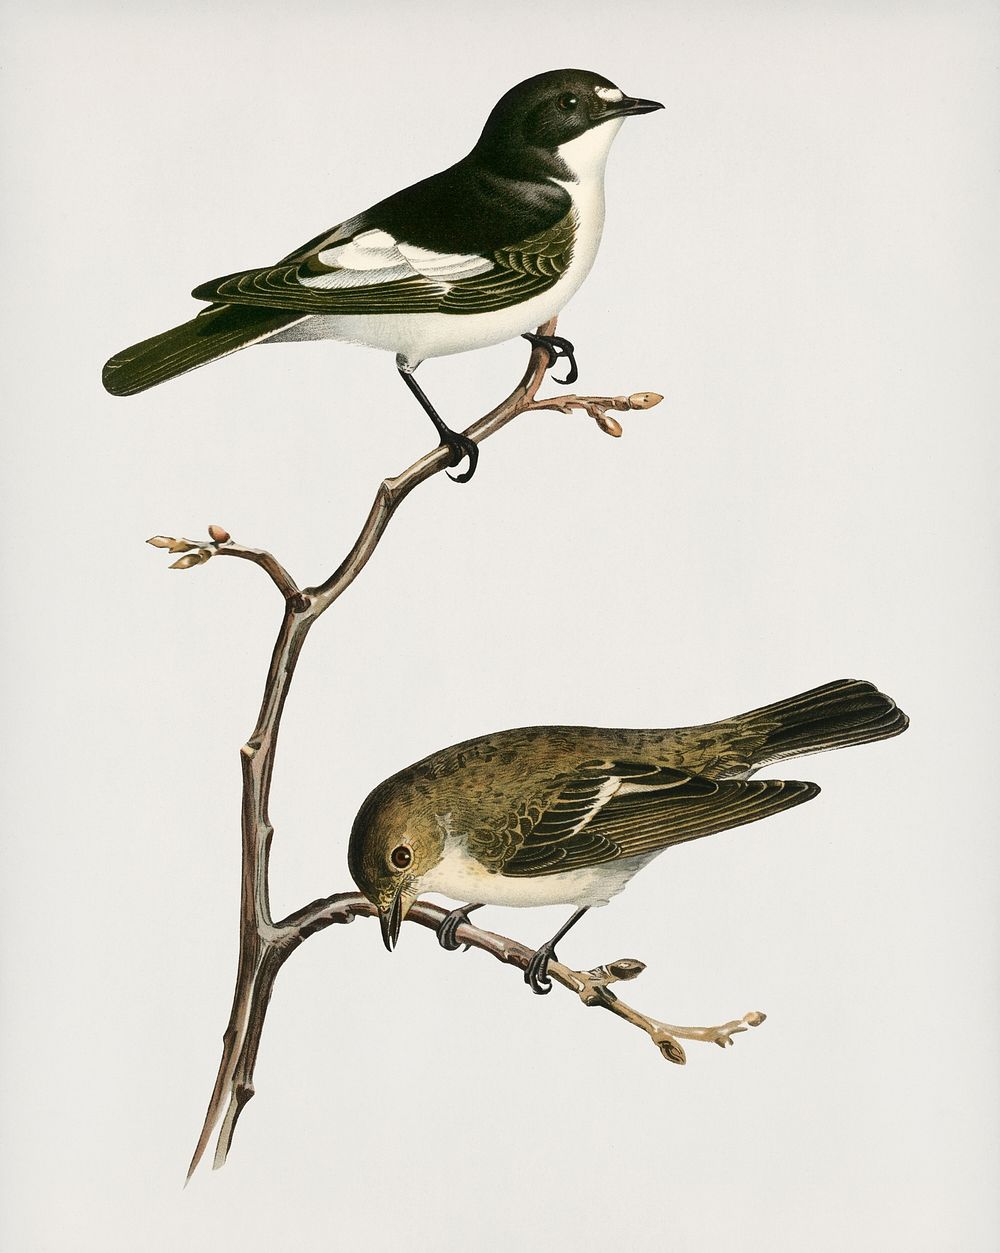 Pied Flycatcher (Muscicapa atricapilla) illustrated by the von Wright brothers. Digitally enhanced from our own 1929 folio…